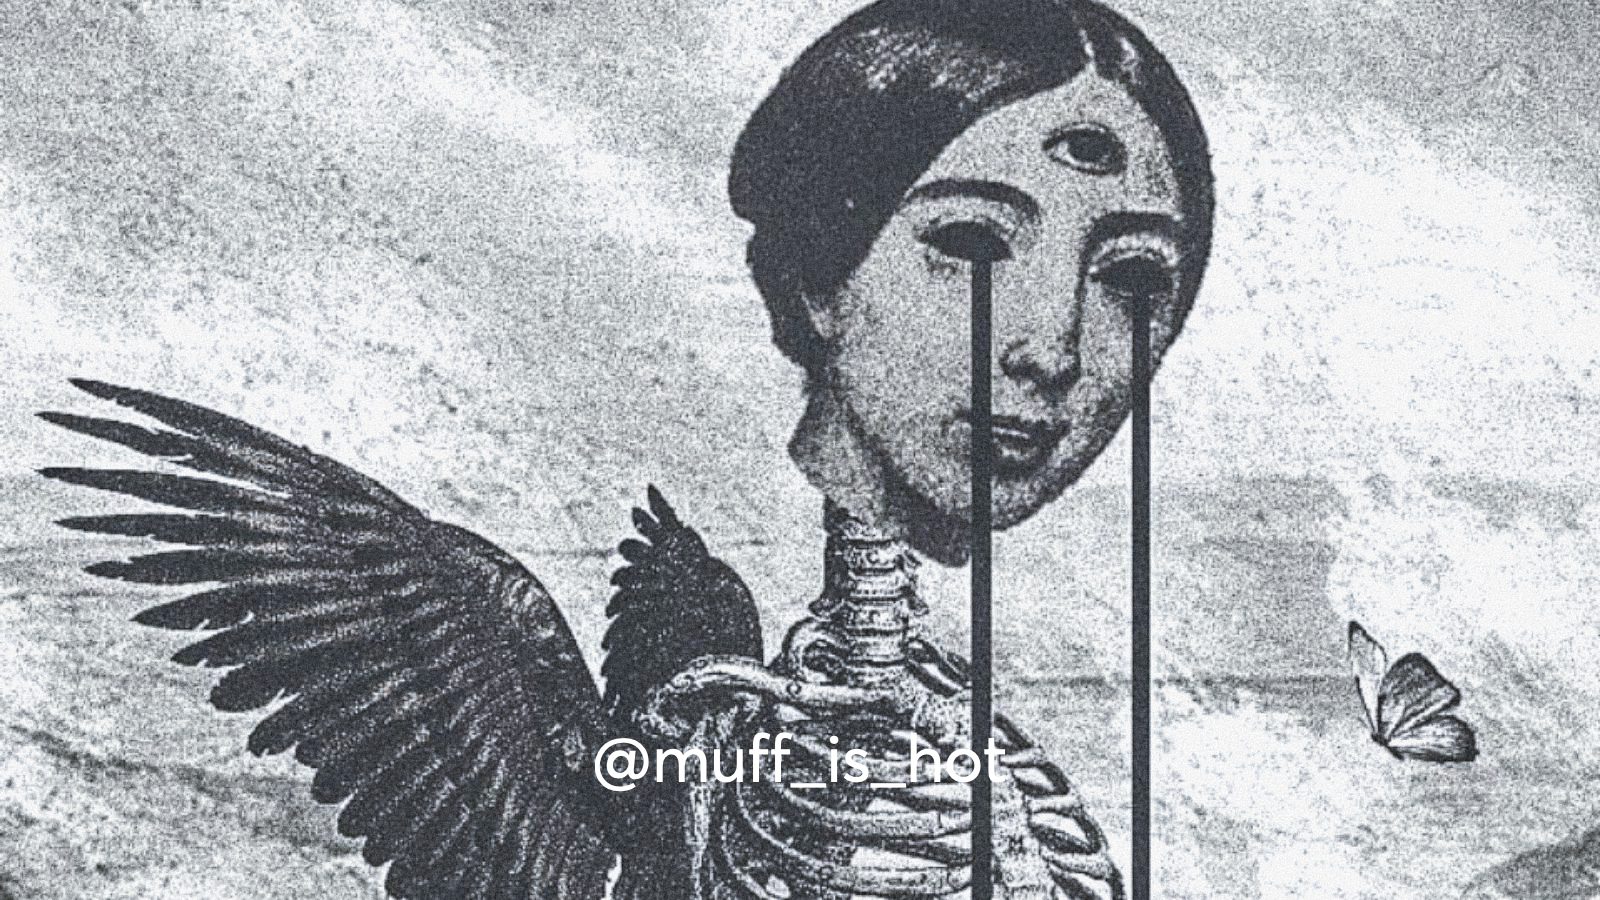 A collage art depicting the human anatomy, a woman with a skeleton body and wings behind her.